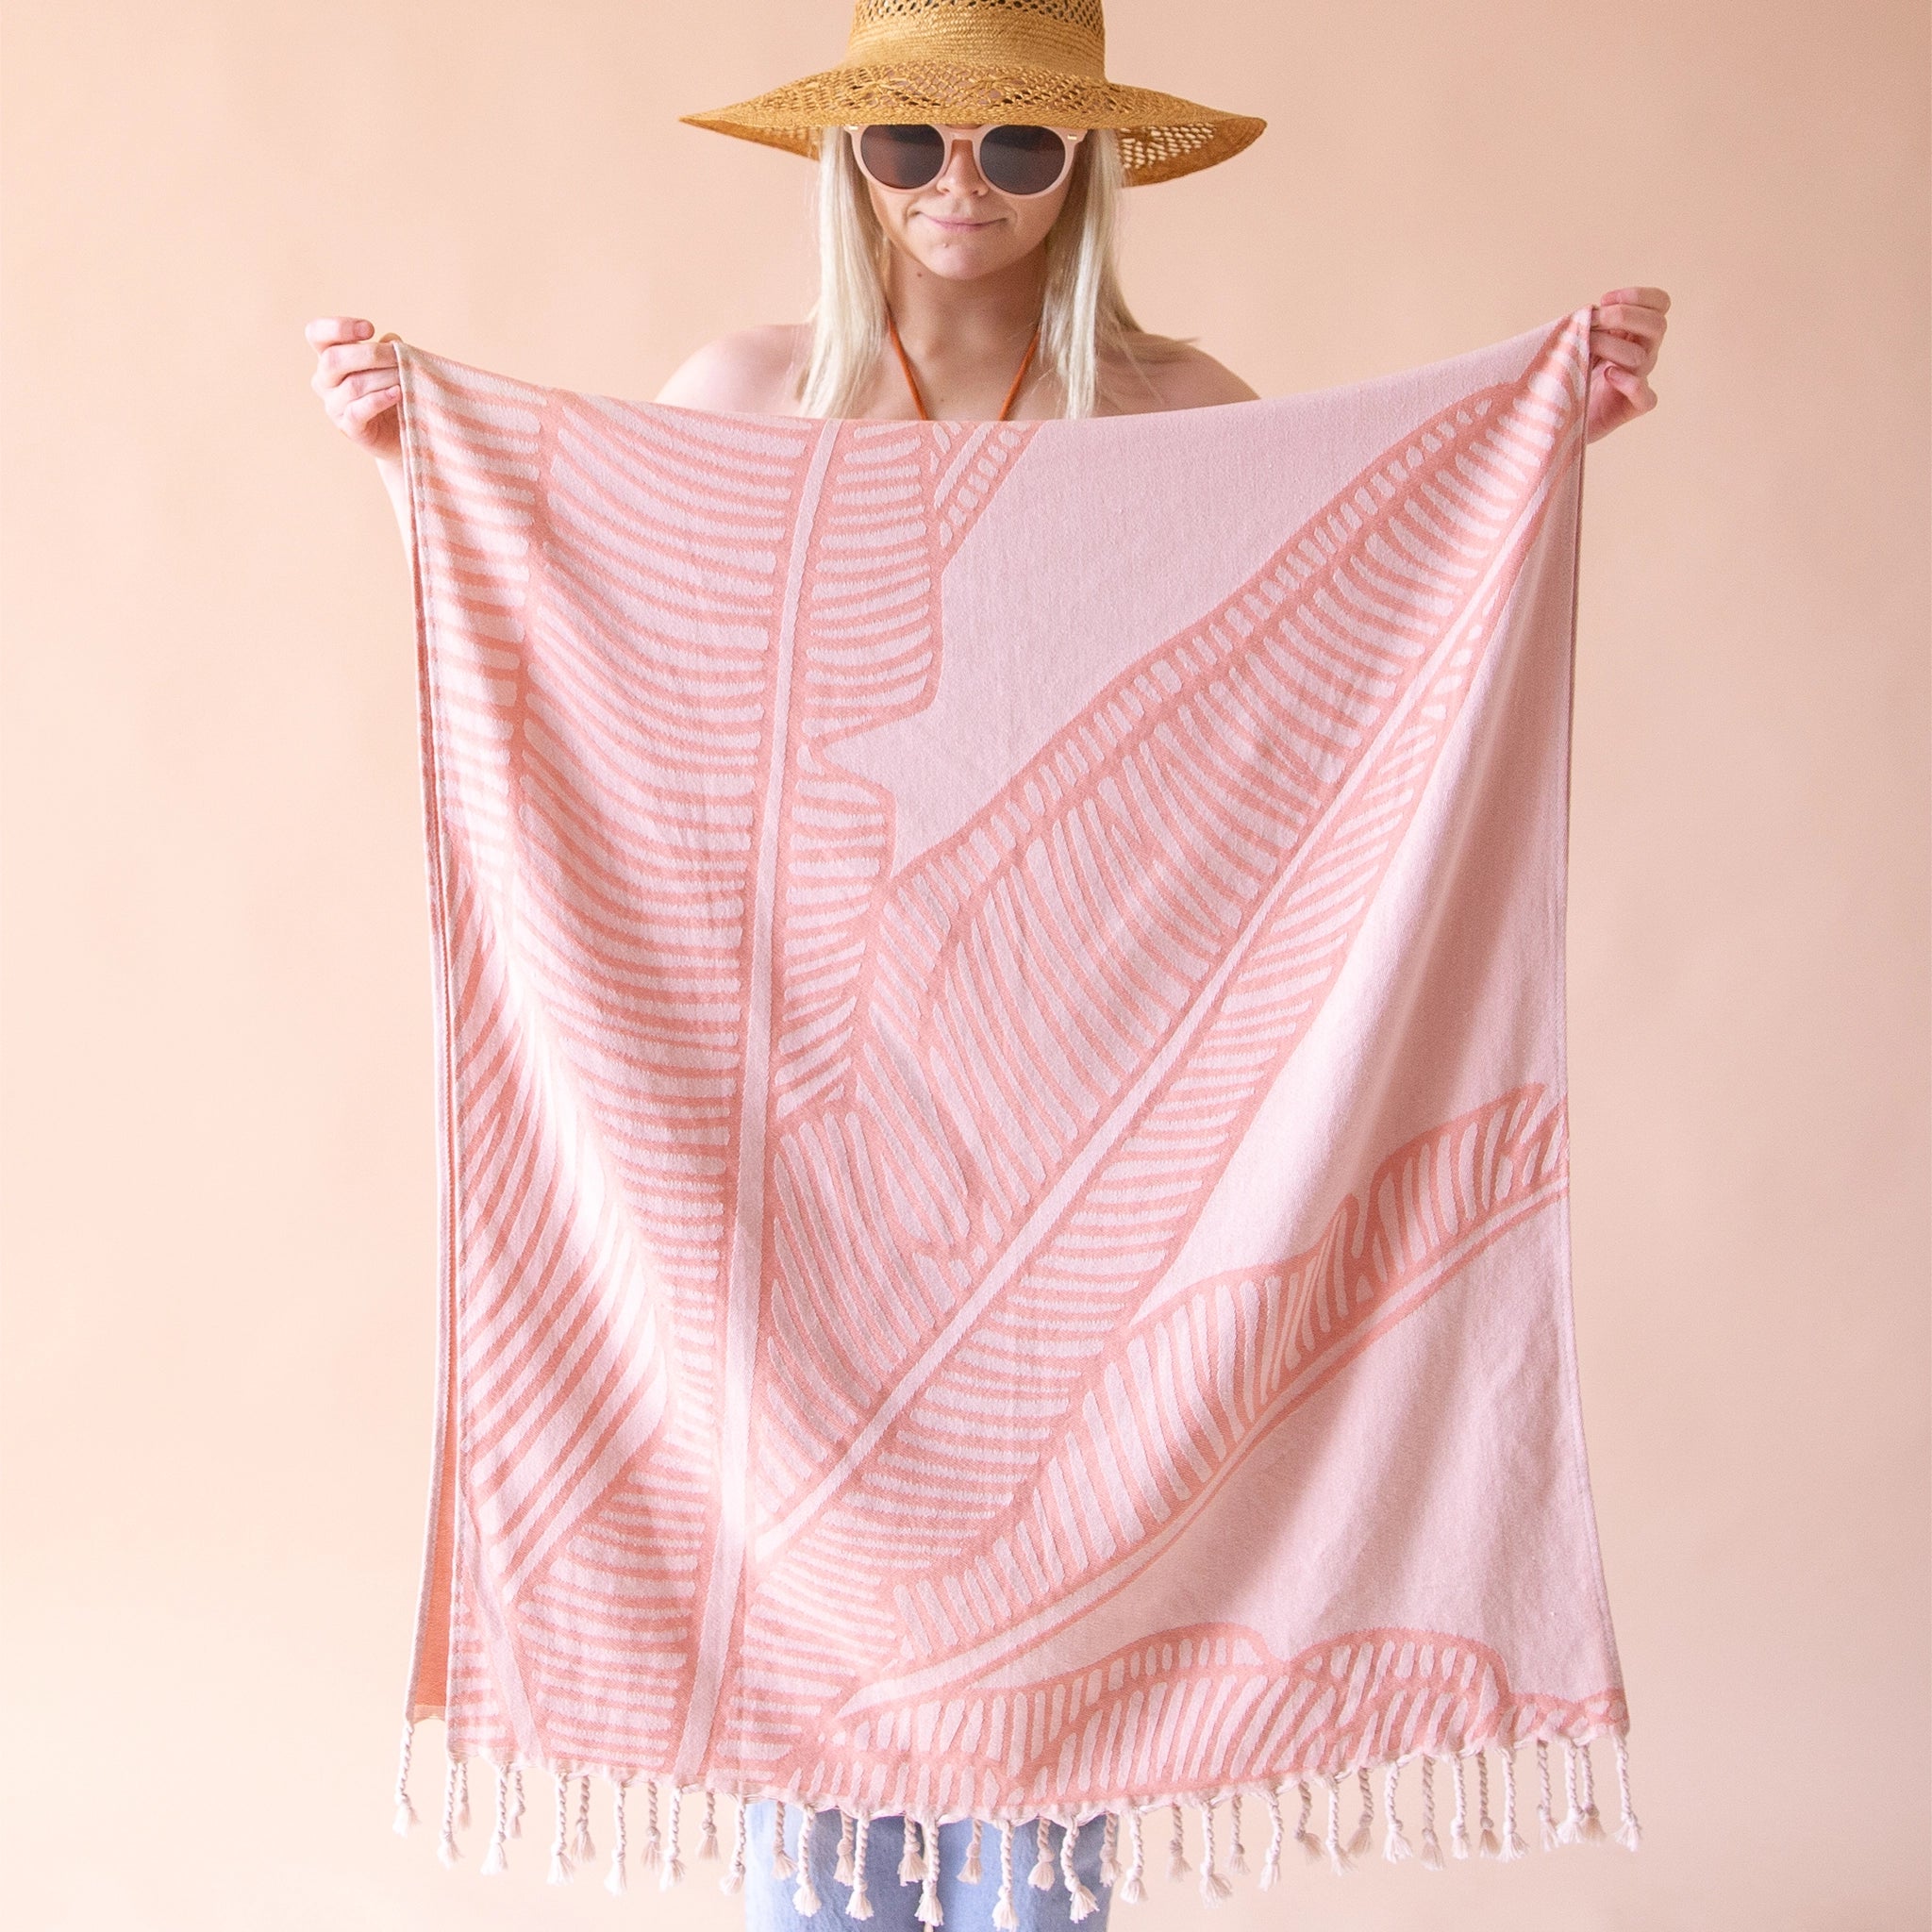 On a beige background is a model holding up the Bird of Paradise Beach Towel with the bird of paradise leaf print and string tassels on each end.